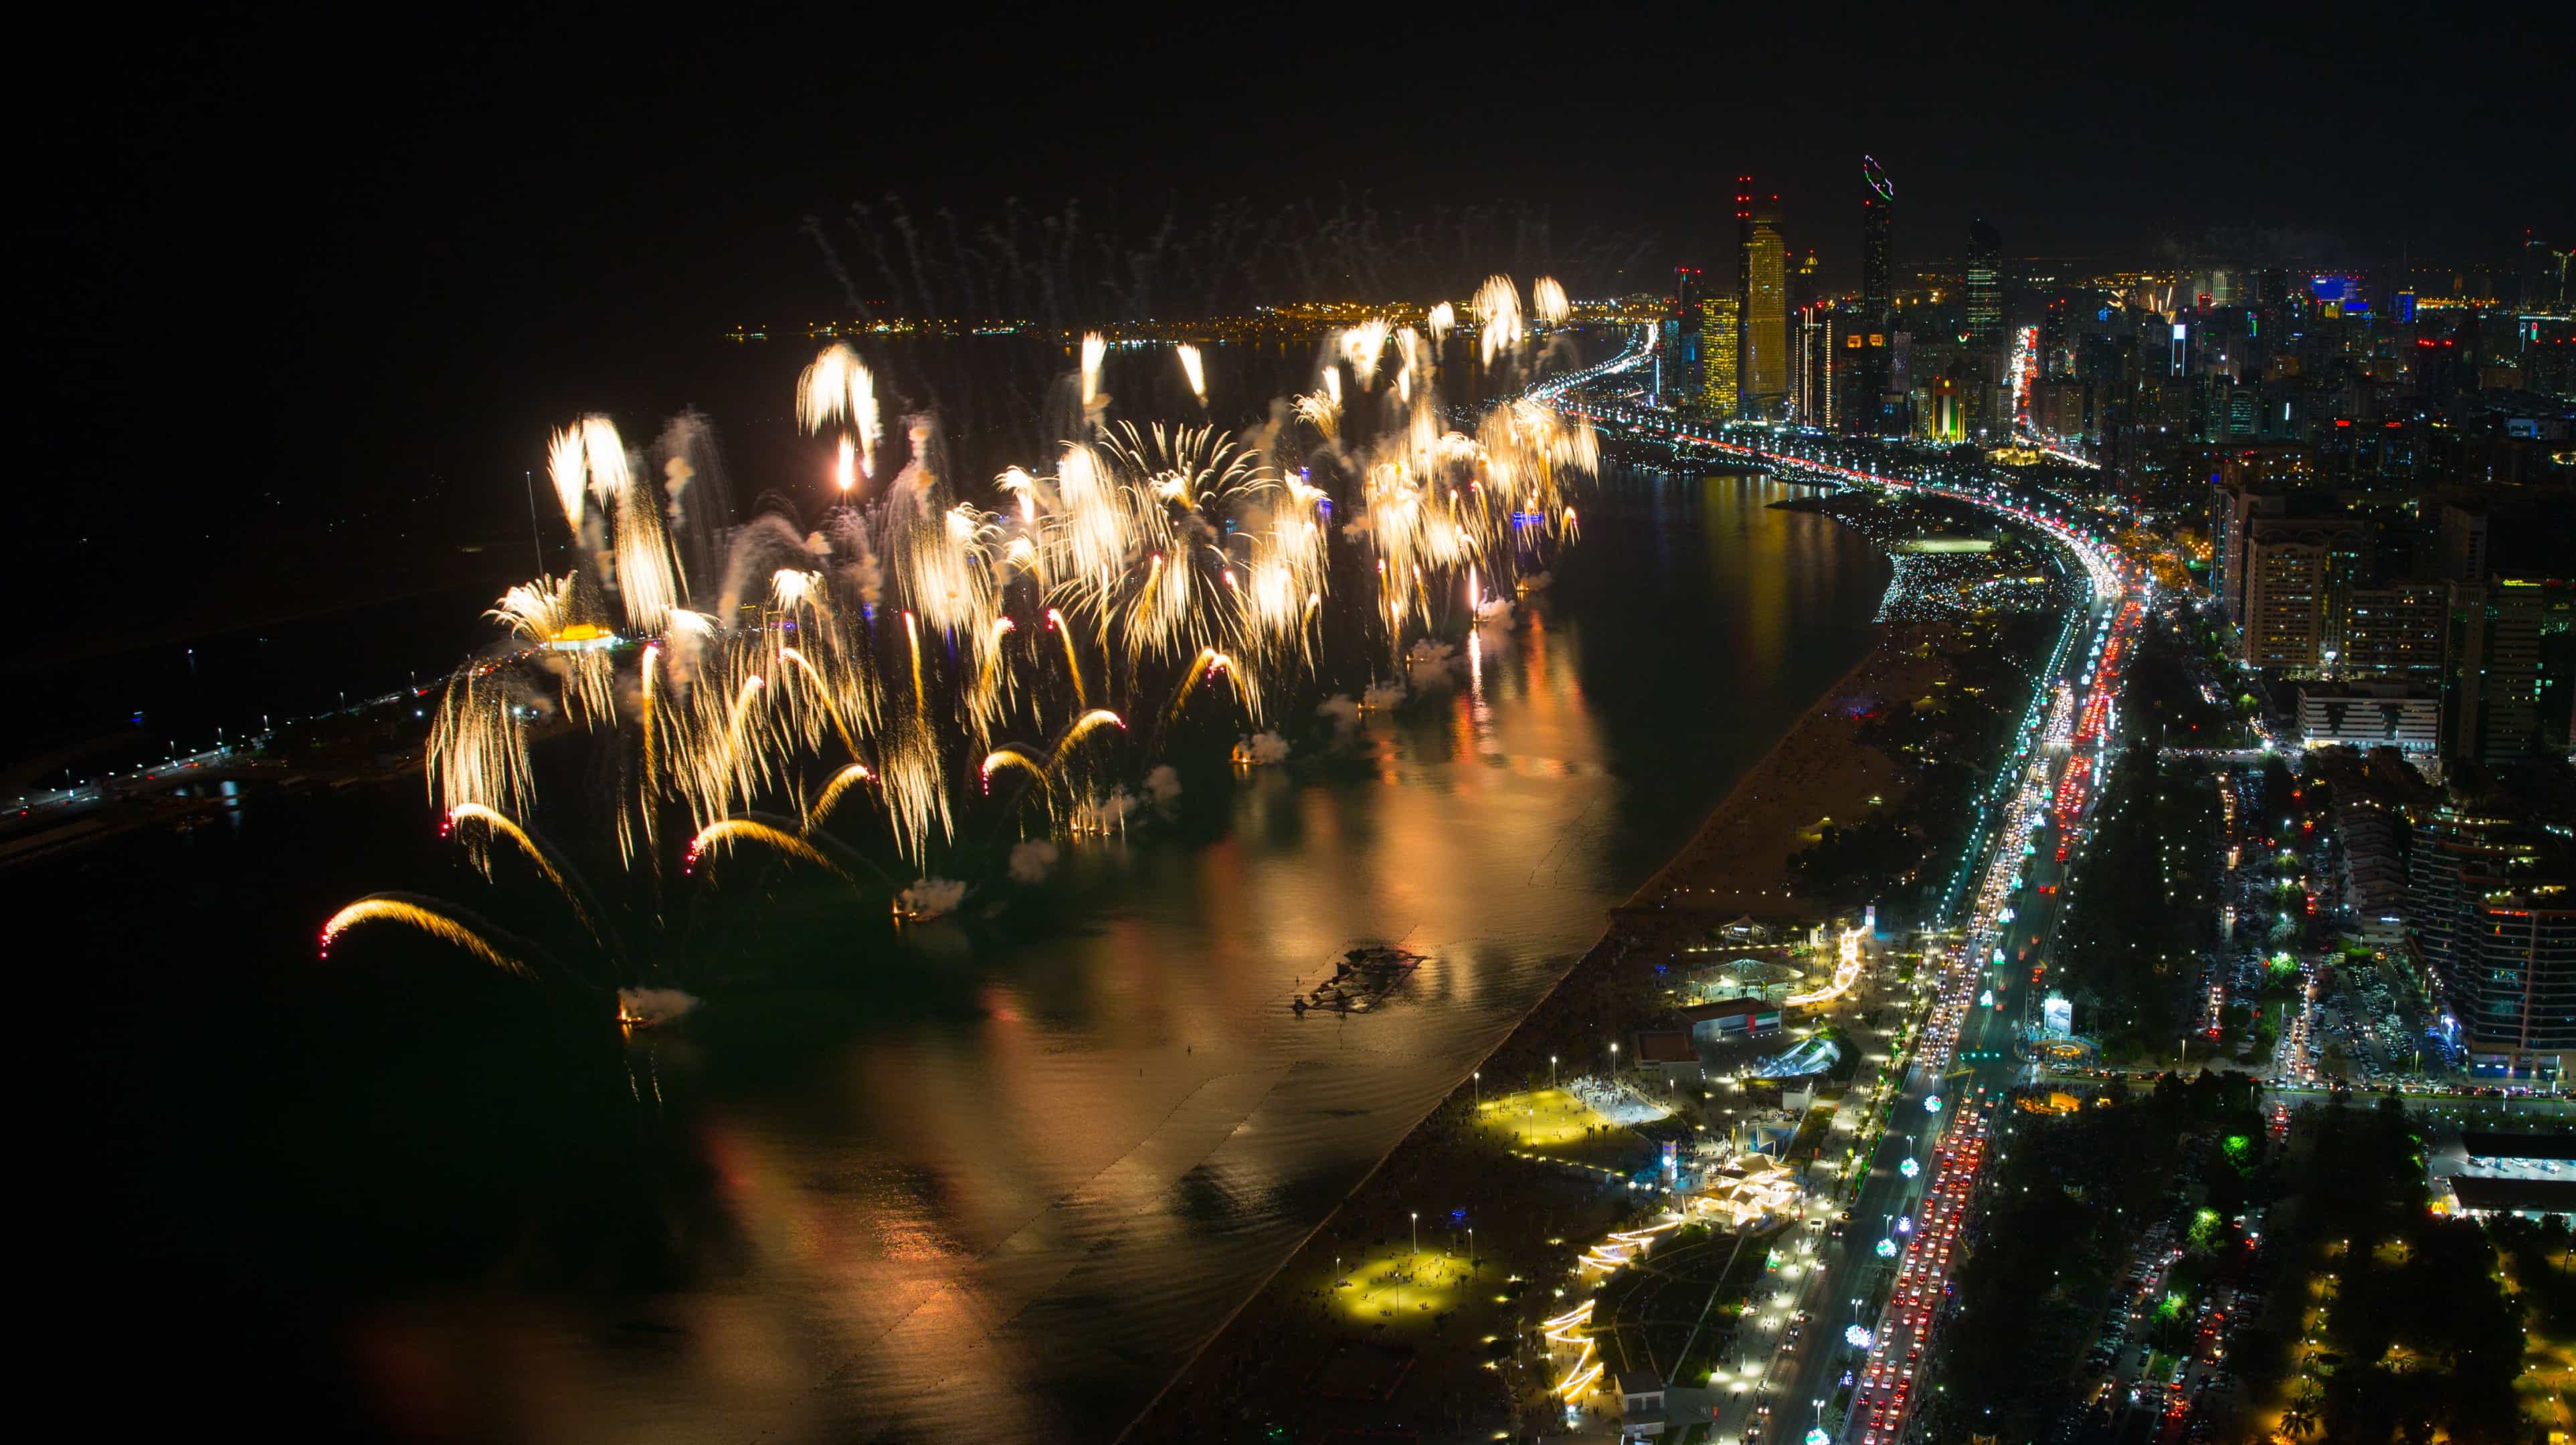 Fireworks on one of the public holidays in Abu Dhabi Emirate